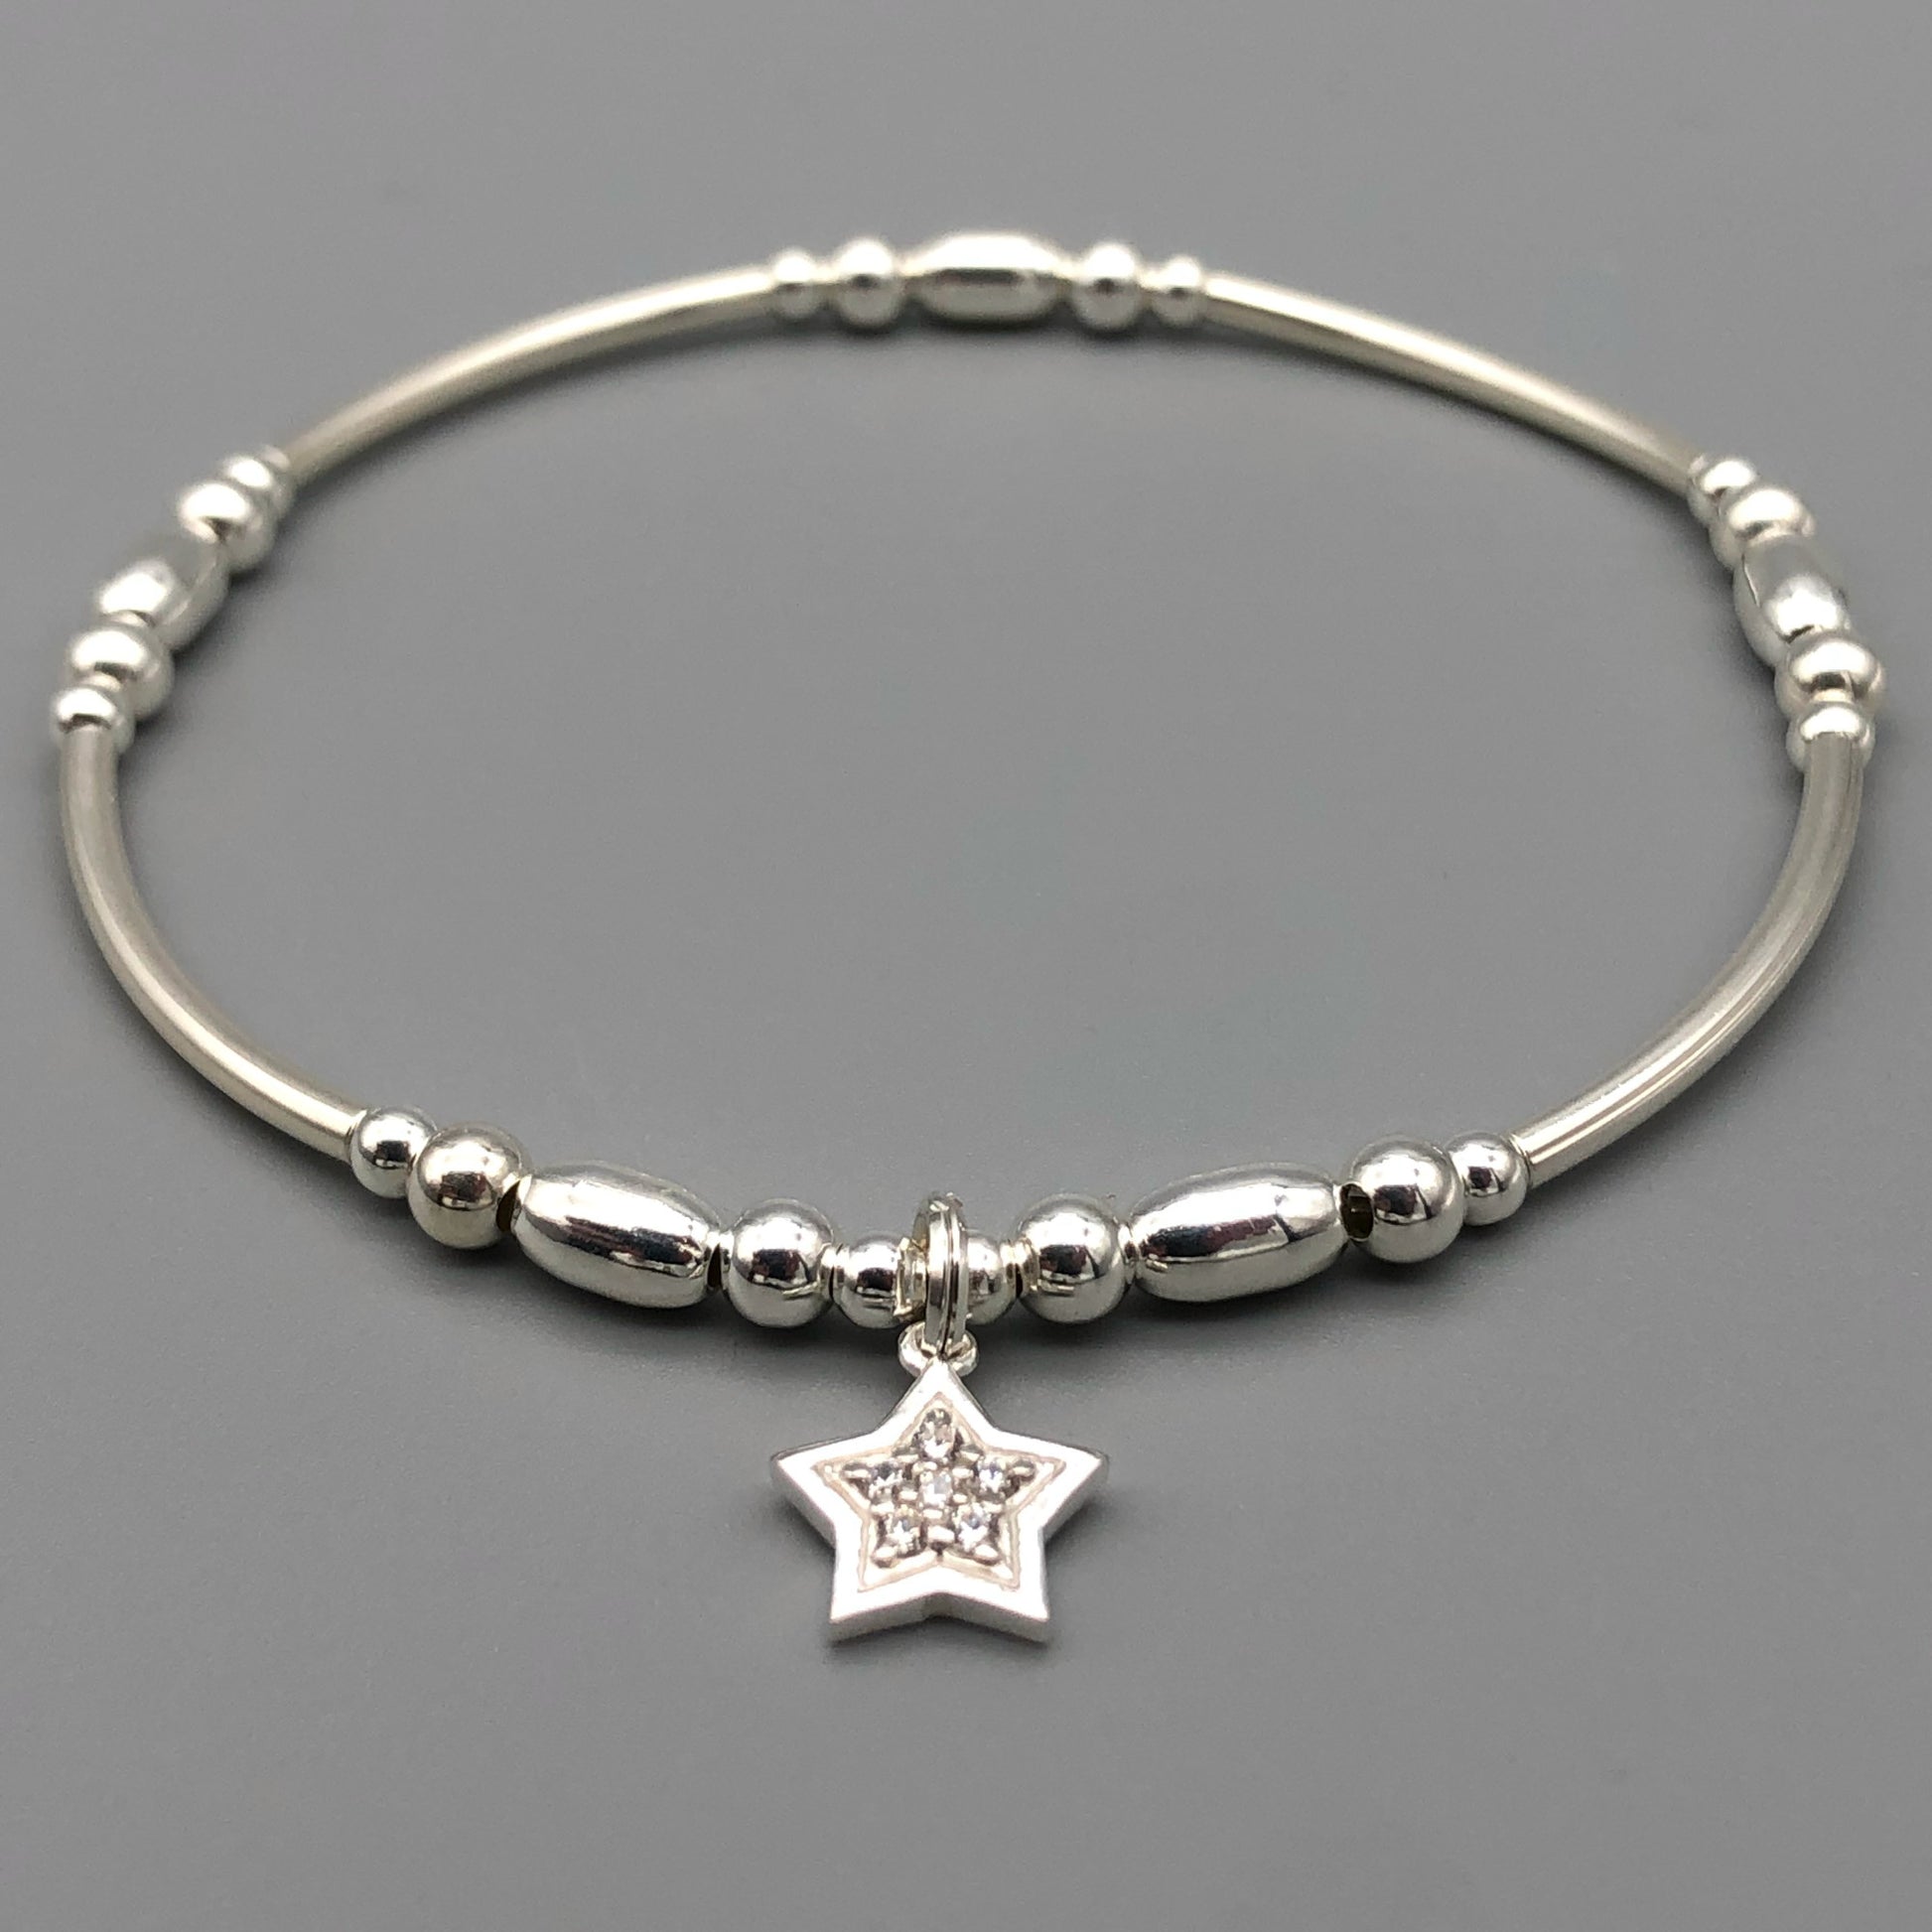 Star charm sterling silver stacking charm bracelet by My Silver Wish